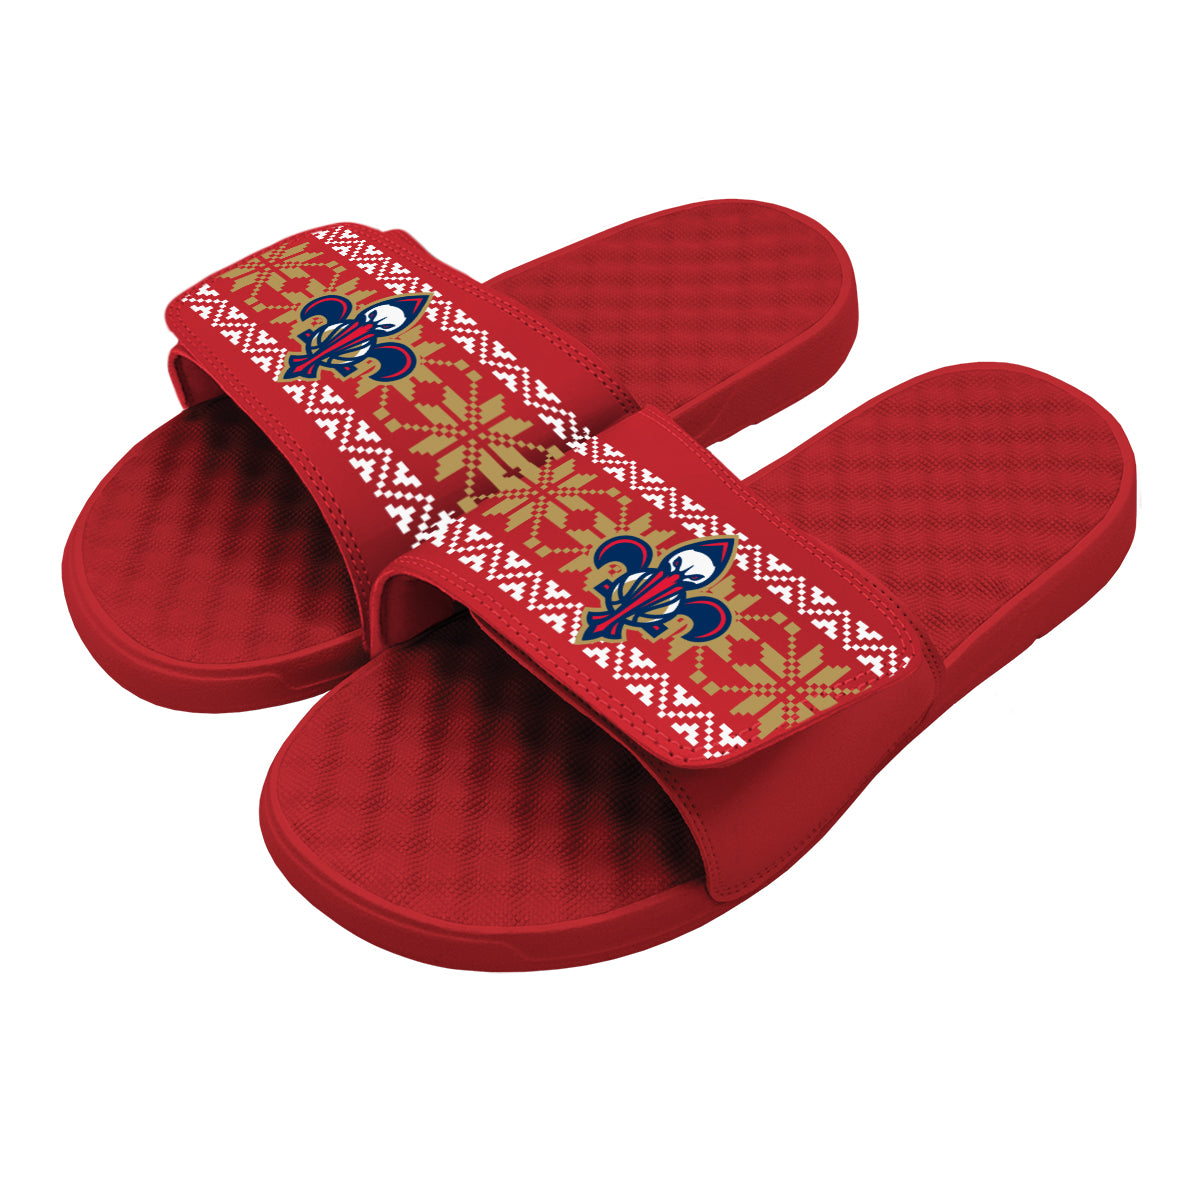 New Orleans Pelicans Ugly Sweater Slides